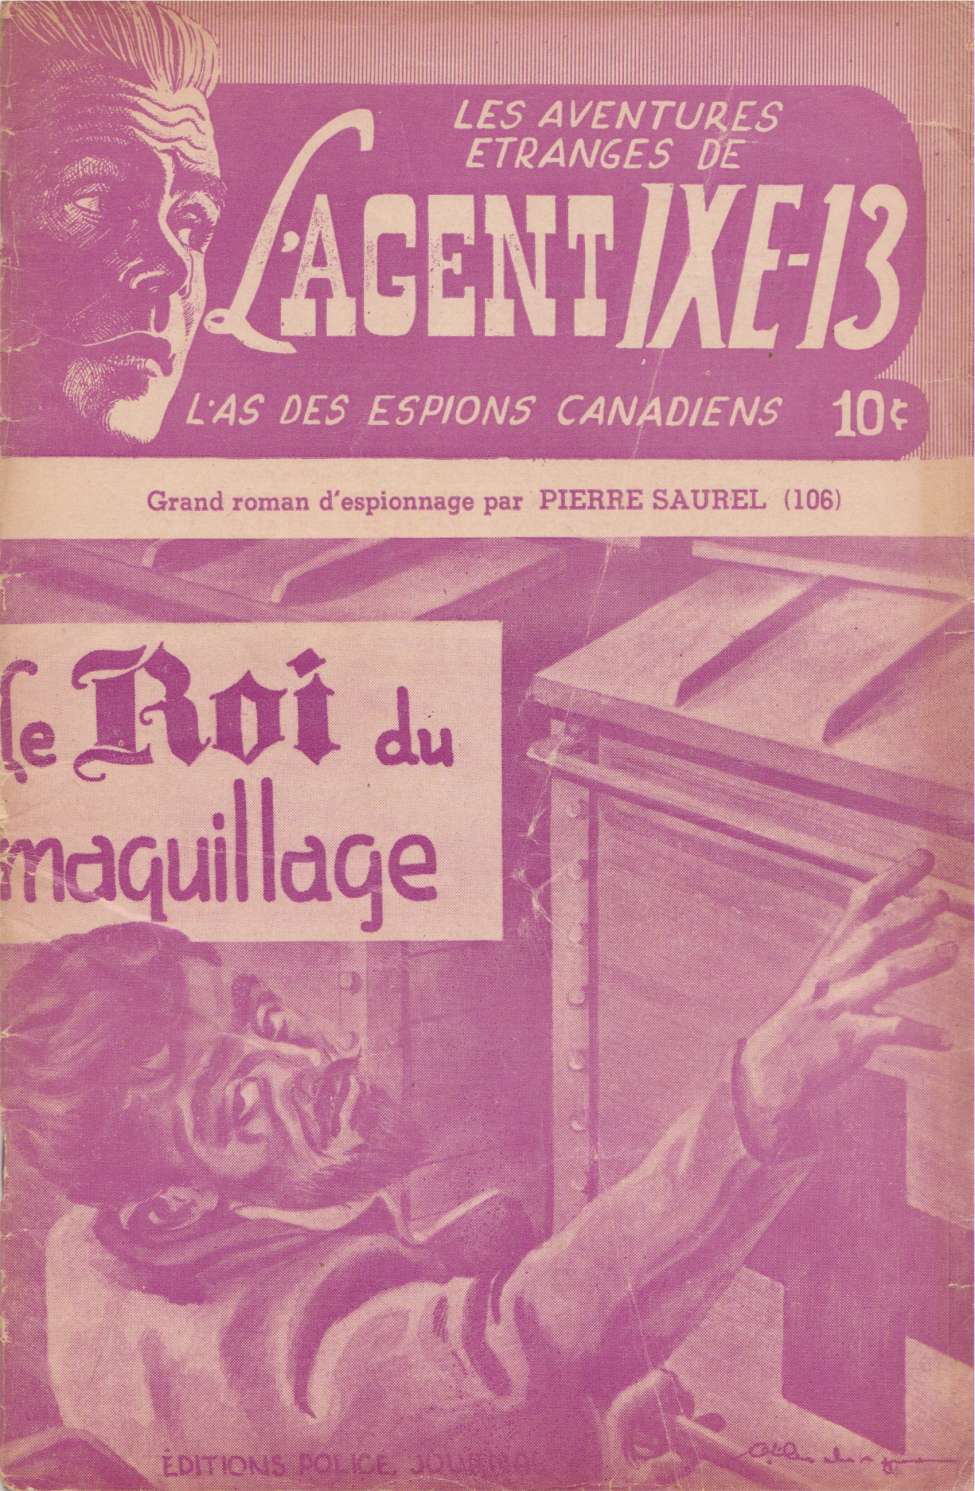 Book Cover For L'Agent IXE-13 v2 106 - Le roi du maquillage